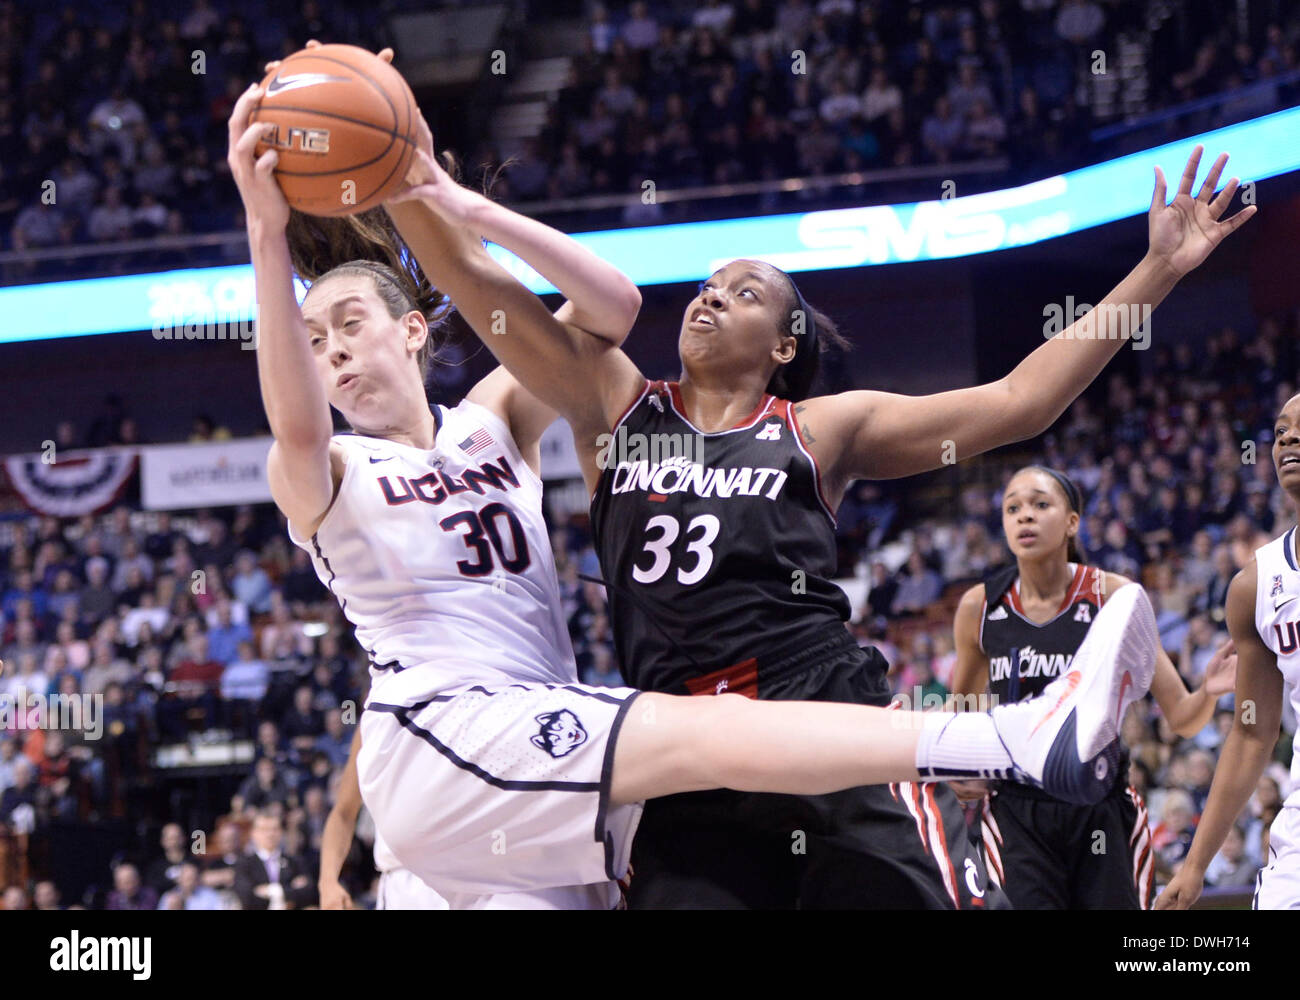 March 8, 2014 - Uncasville, CT, USA - Saturday March 8, 2014: UConn huskies guard-forward Breanna Stewart (30) and Cincinnati Bearcats forward Jeanise Randolph (33) battle for a rebound during the 1st half of the American Athletic Conference womens basketball tournament game between Cincinnati and UConn at Mohegan Sun Arena in Uncasville, CT. Bill Shettle / Cal Sport Media. Stock Photo